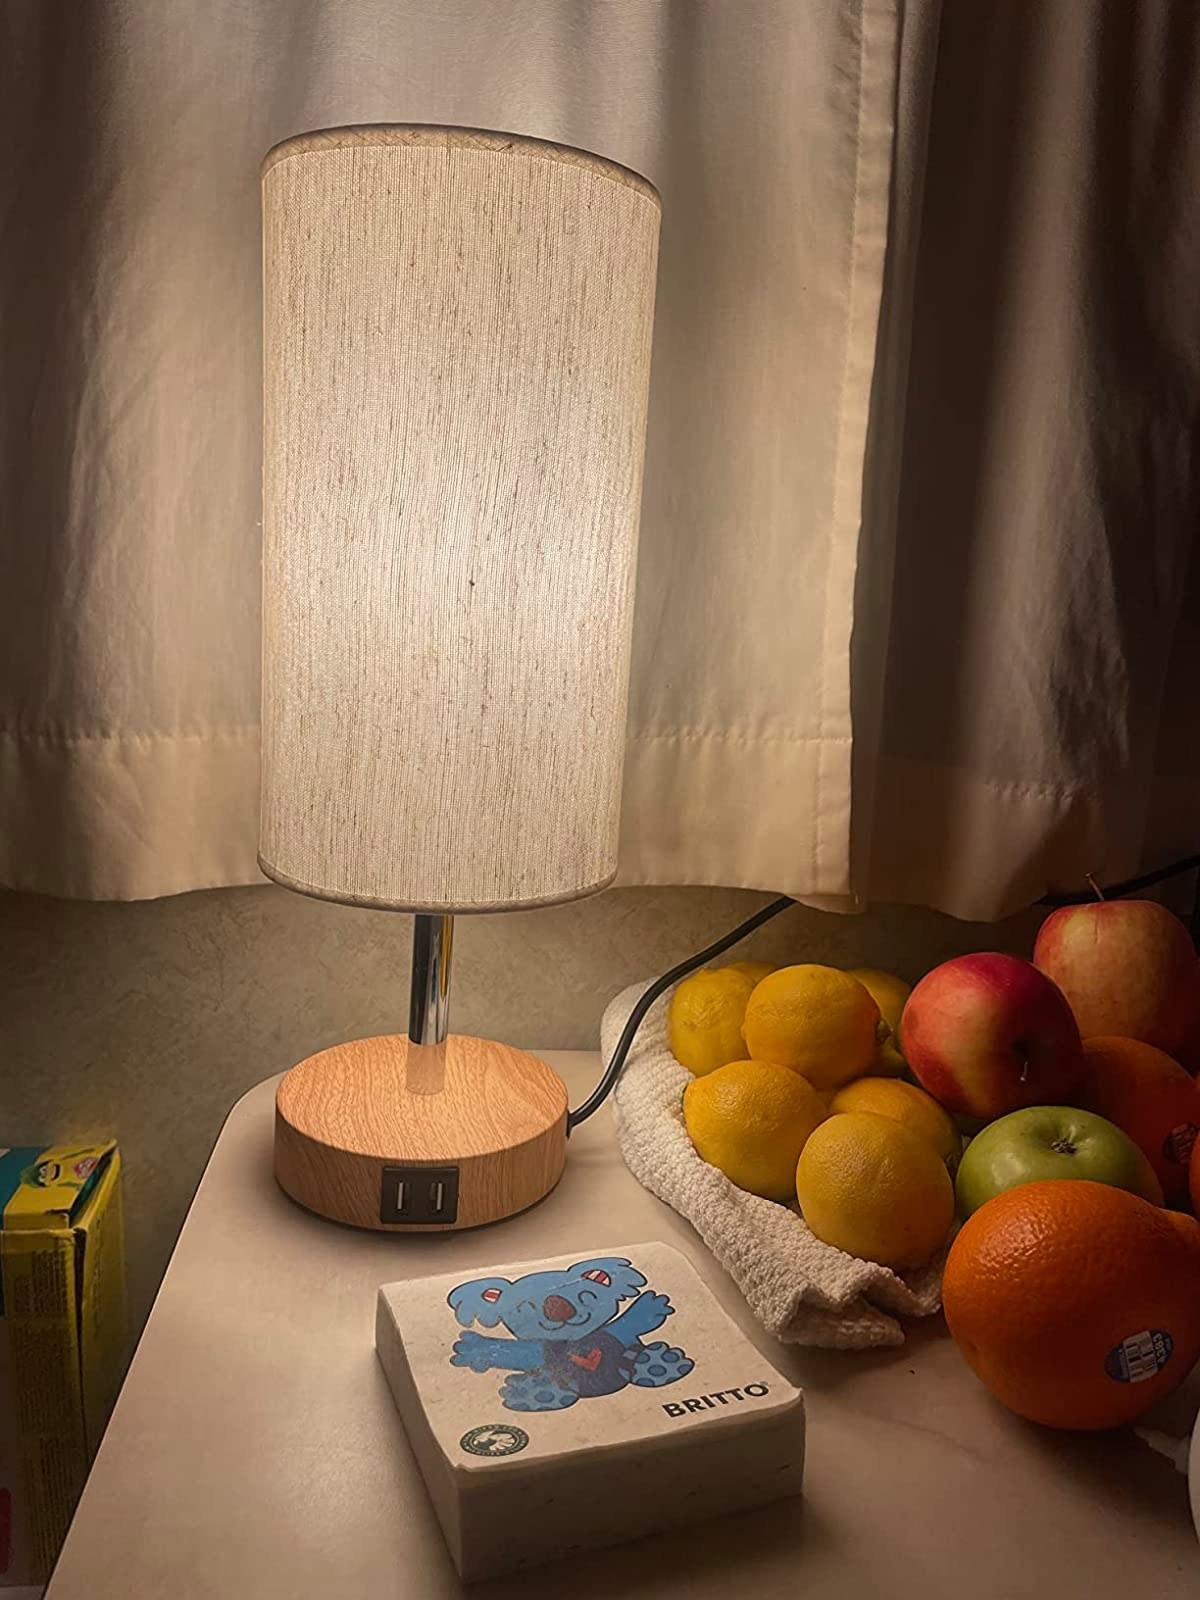 The lamp on a table